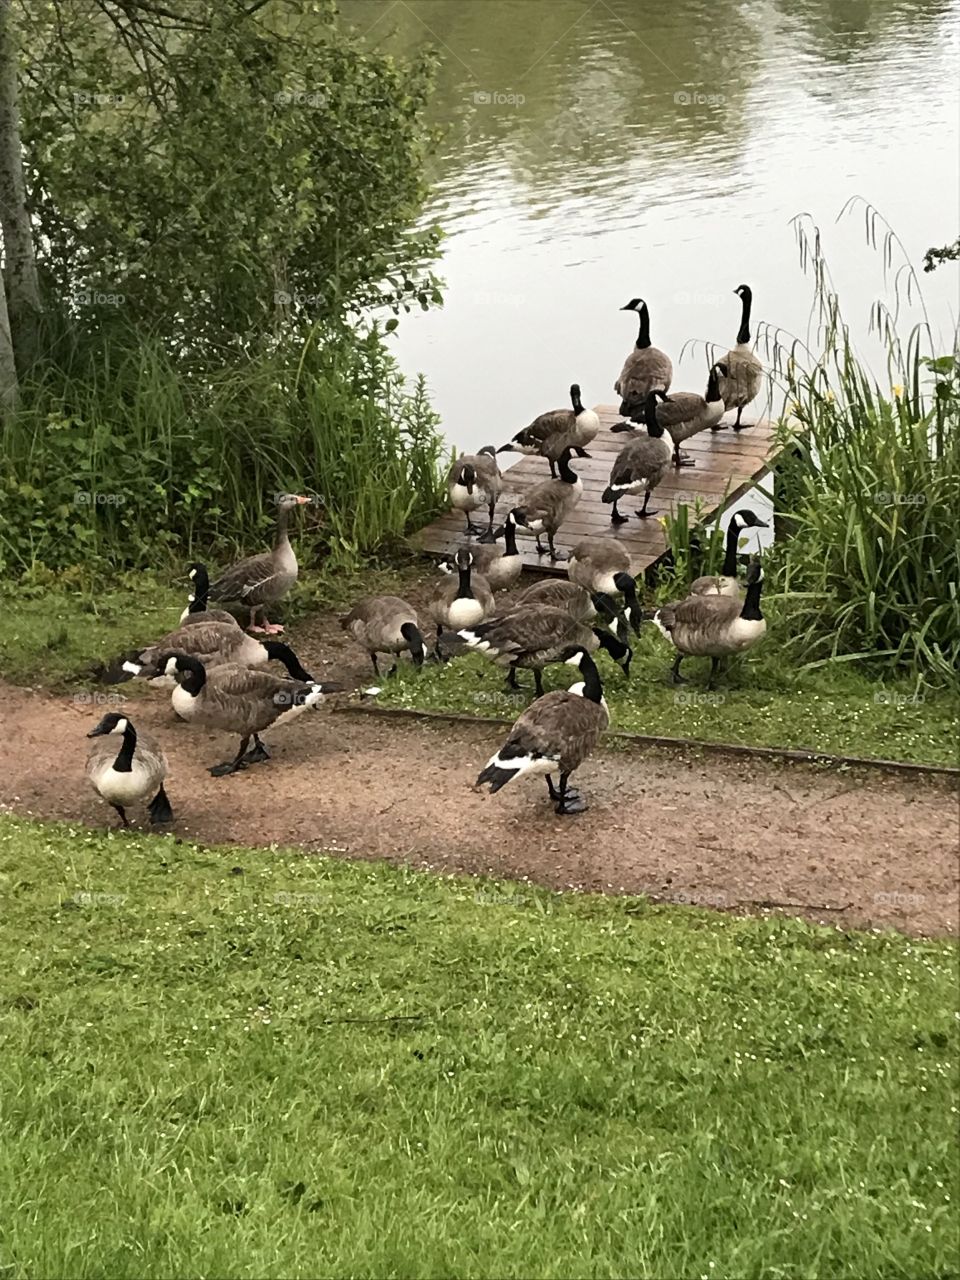 Geese queing